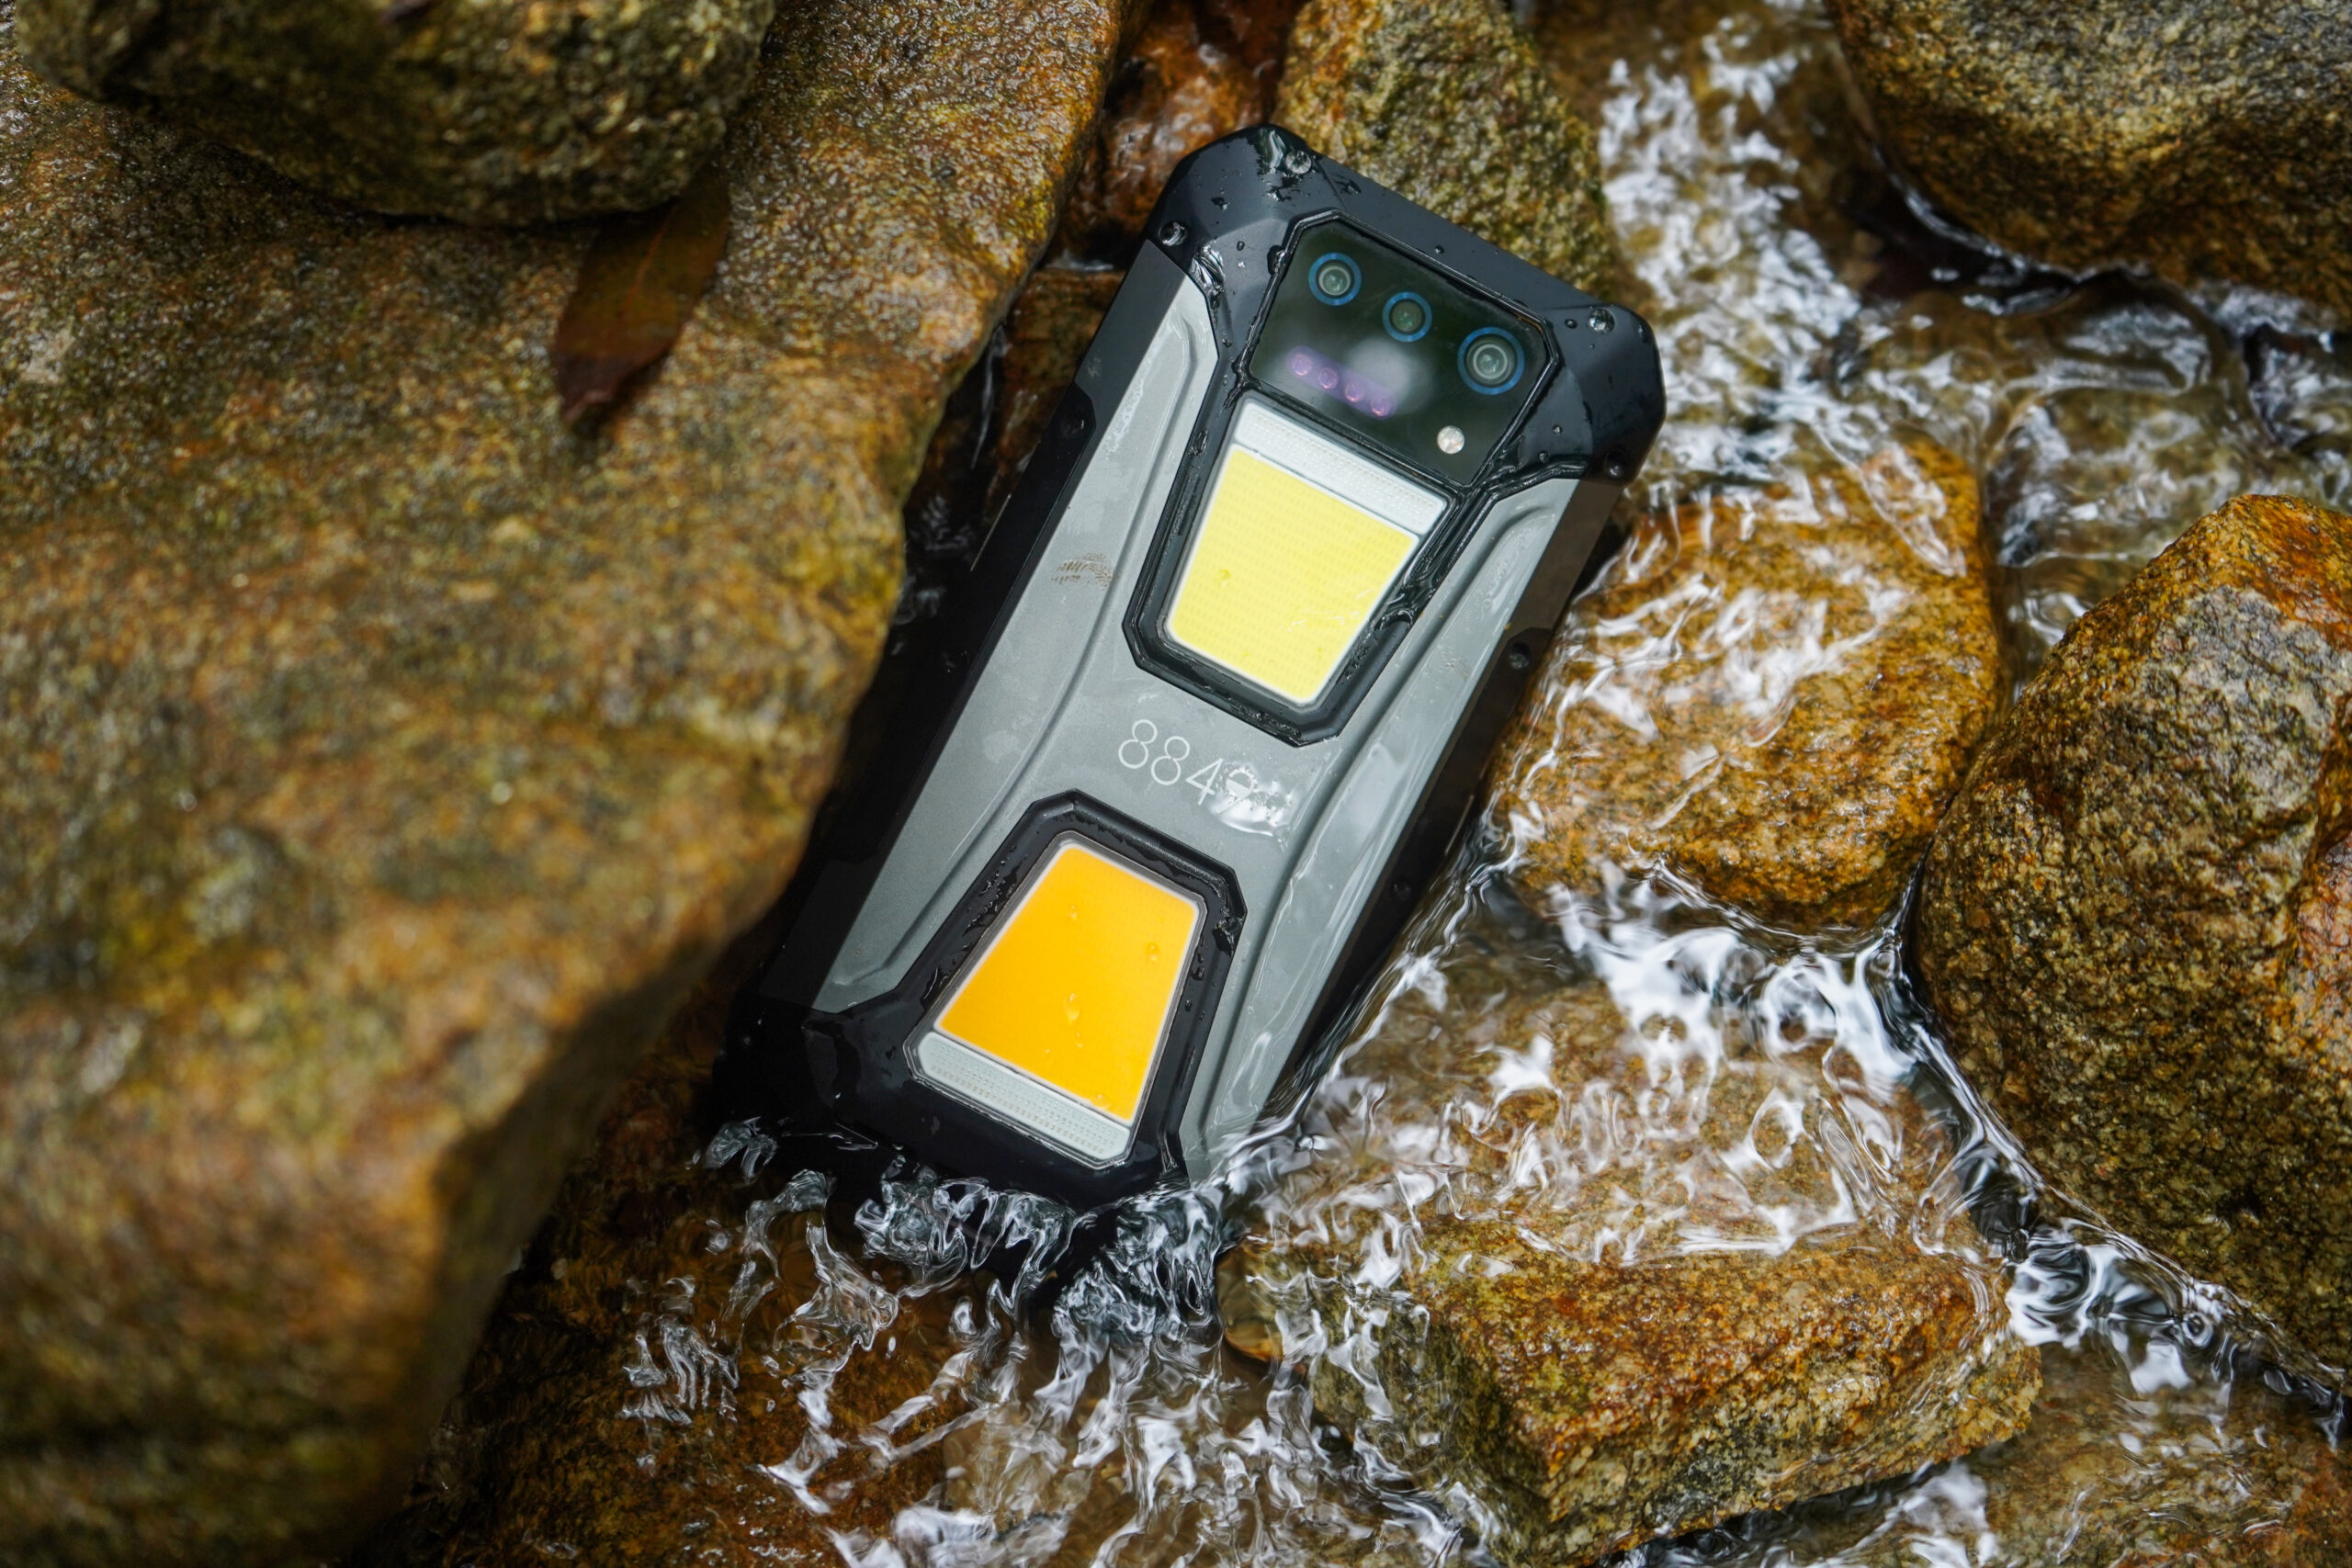 tank2 pro projector rugged phone (1)